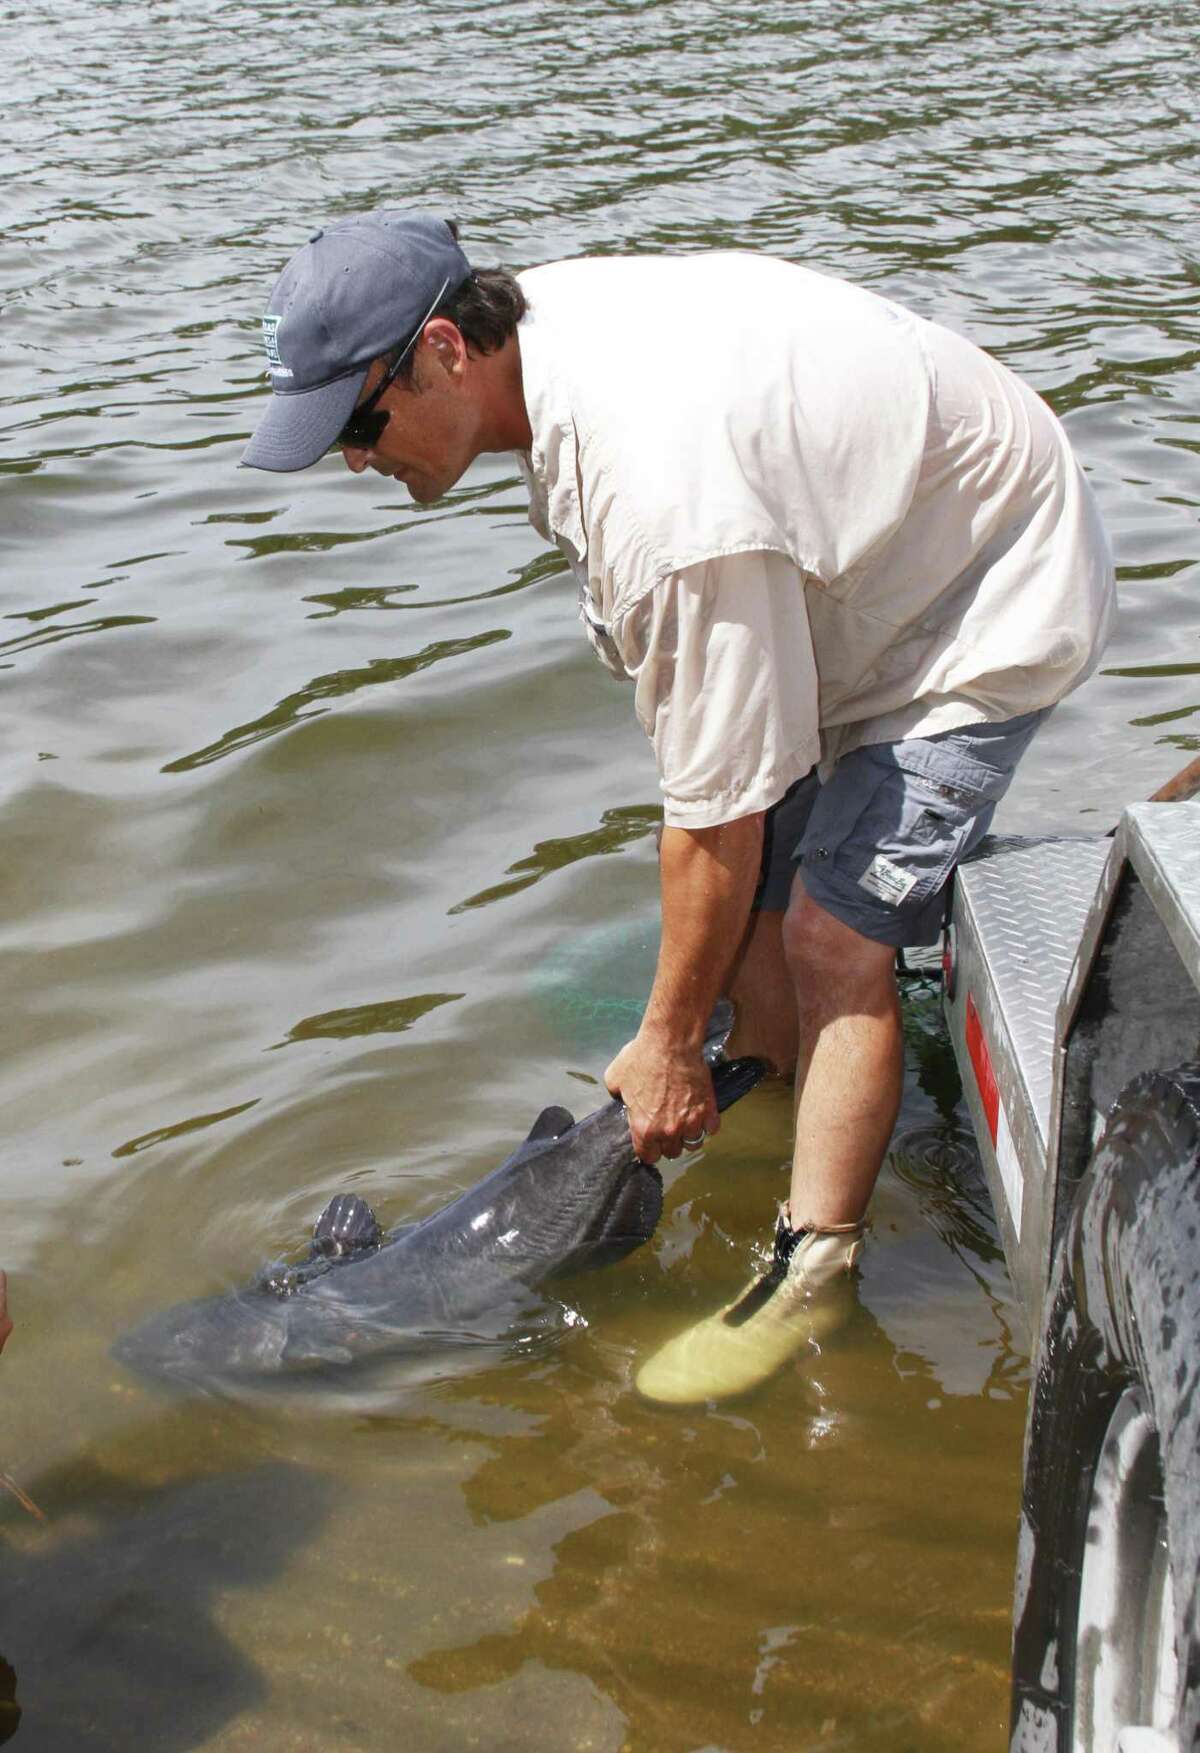 David Stephens  of Texas Parks and Wildlife Department releases one of  40 adult channel catfish stocked into 200-acre Lake Raven in Huntsville State Park after the 10-15-pound fish were "retired" as brood stock at the state's A.E. Wood Fish Hatchery.